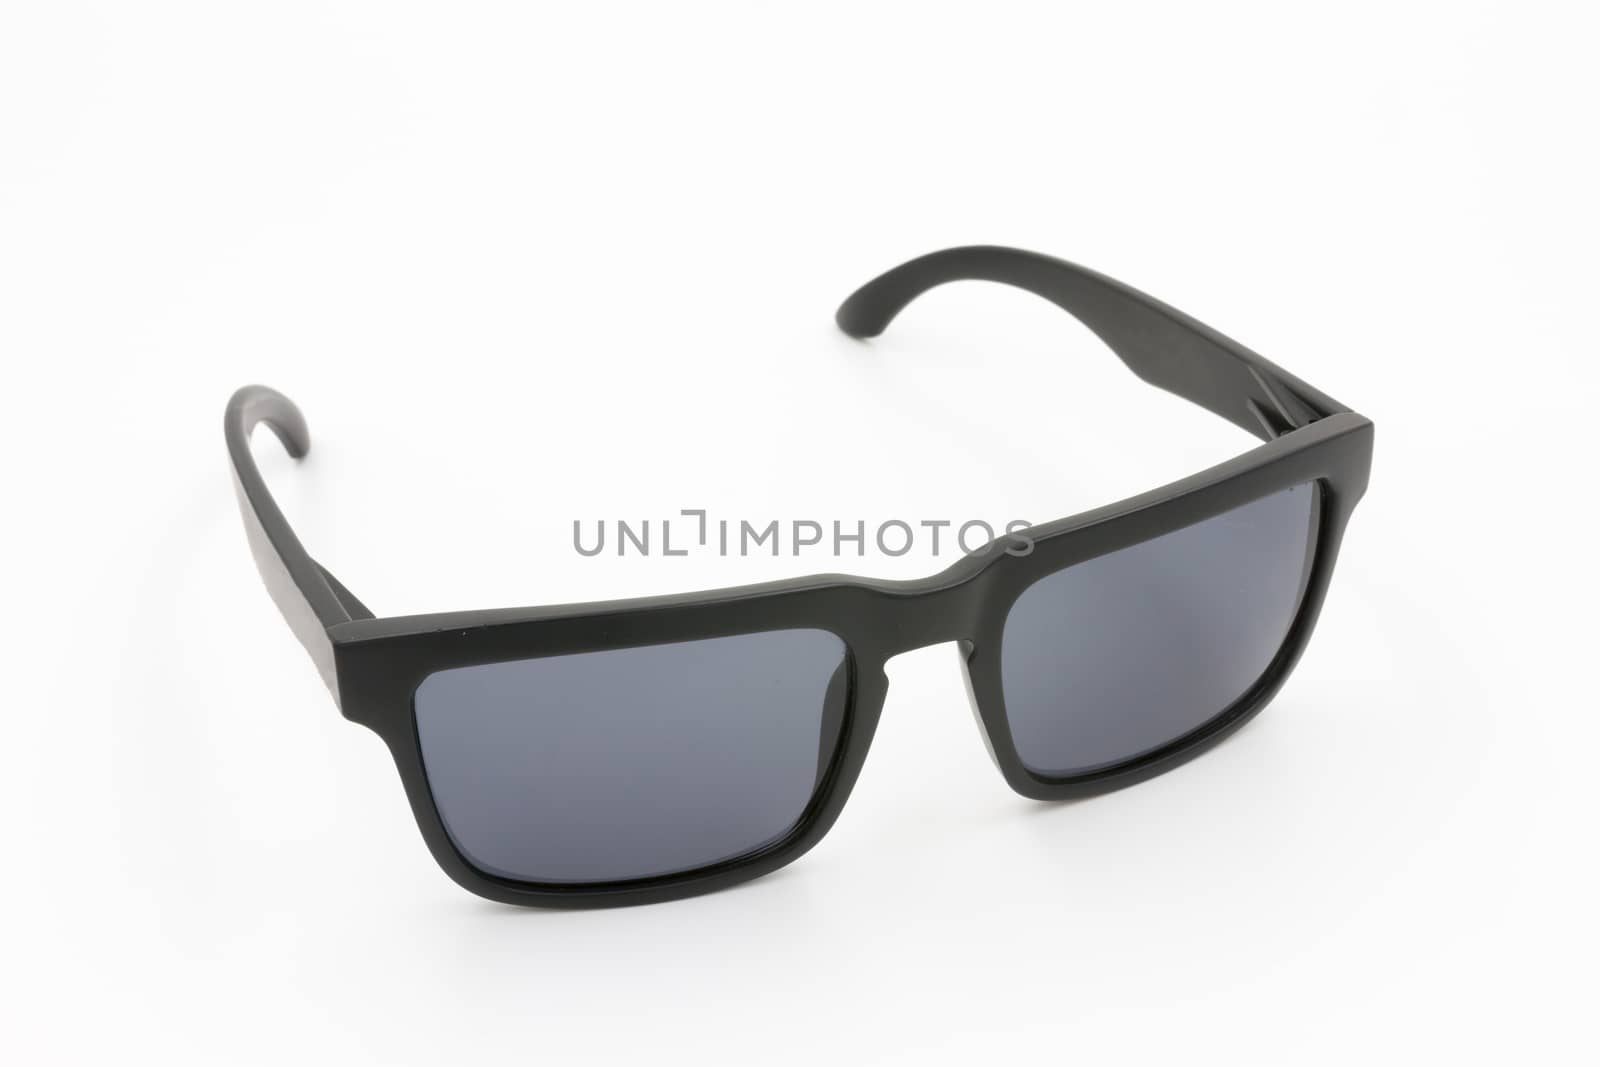 Sunglasses eyewear  on white background by ronnarong